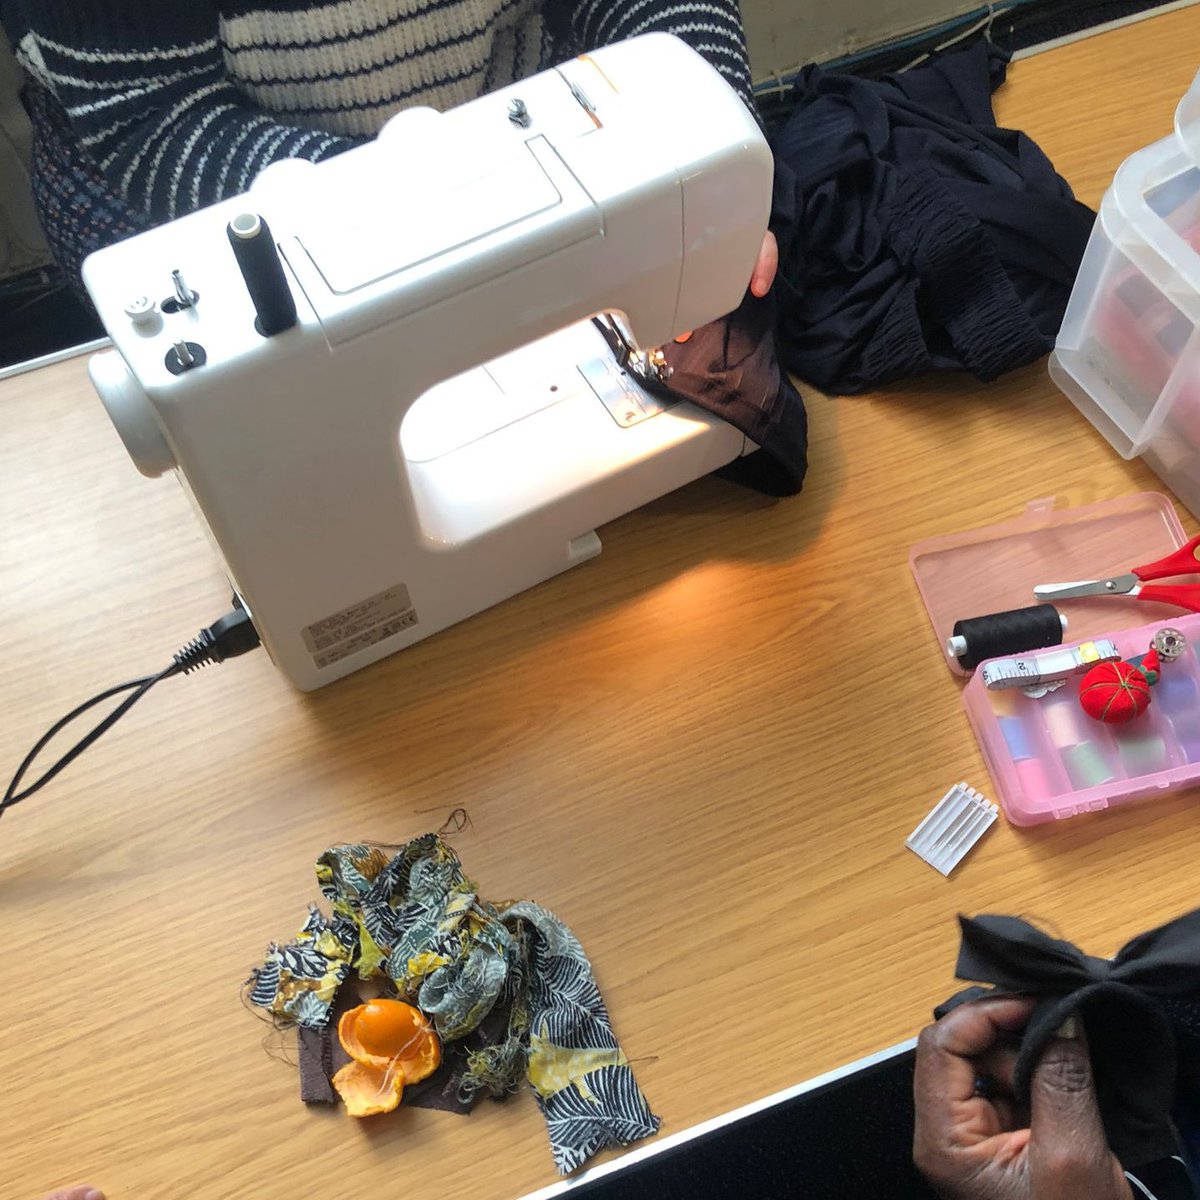 The Craft Corner at the Centre has become a popular spot with those in our community brining items to mend, creative projects to start, and a place to relax and chat while sewing. Thanks to a donation of a sewing machine from John Lewis & Partners for making this possible!